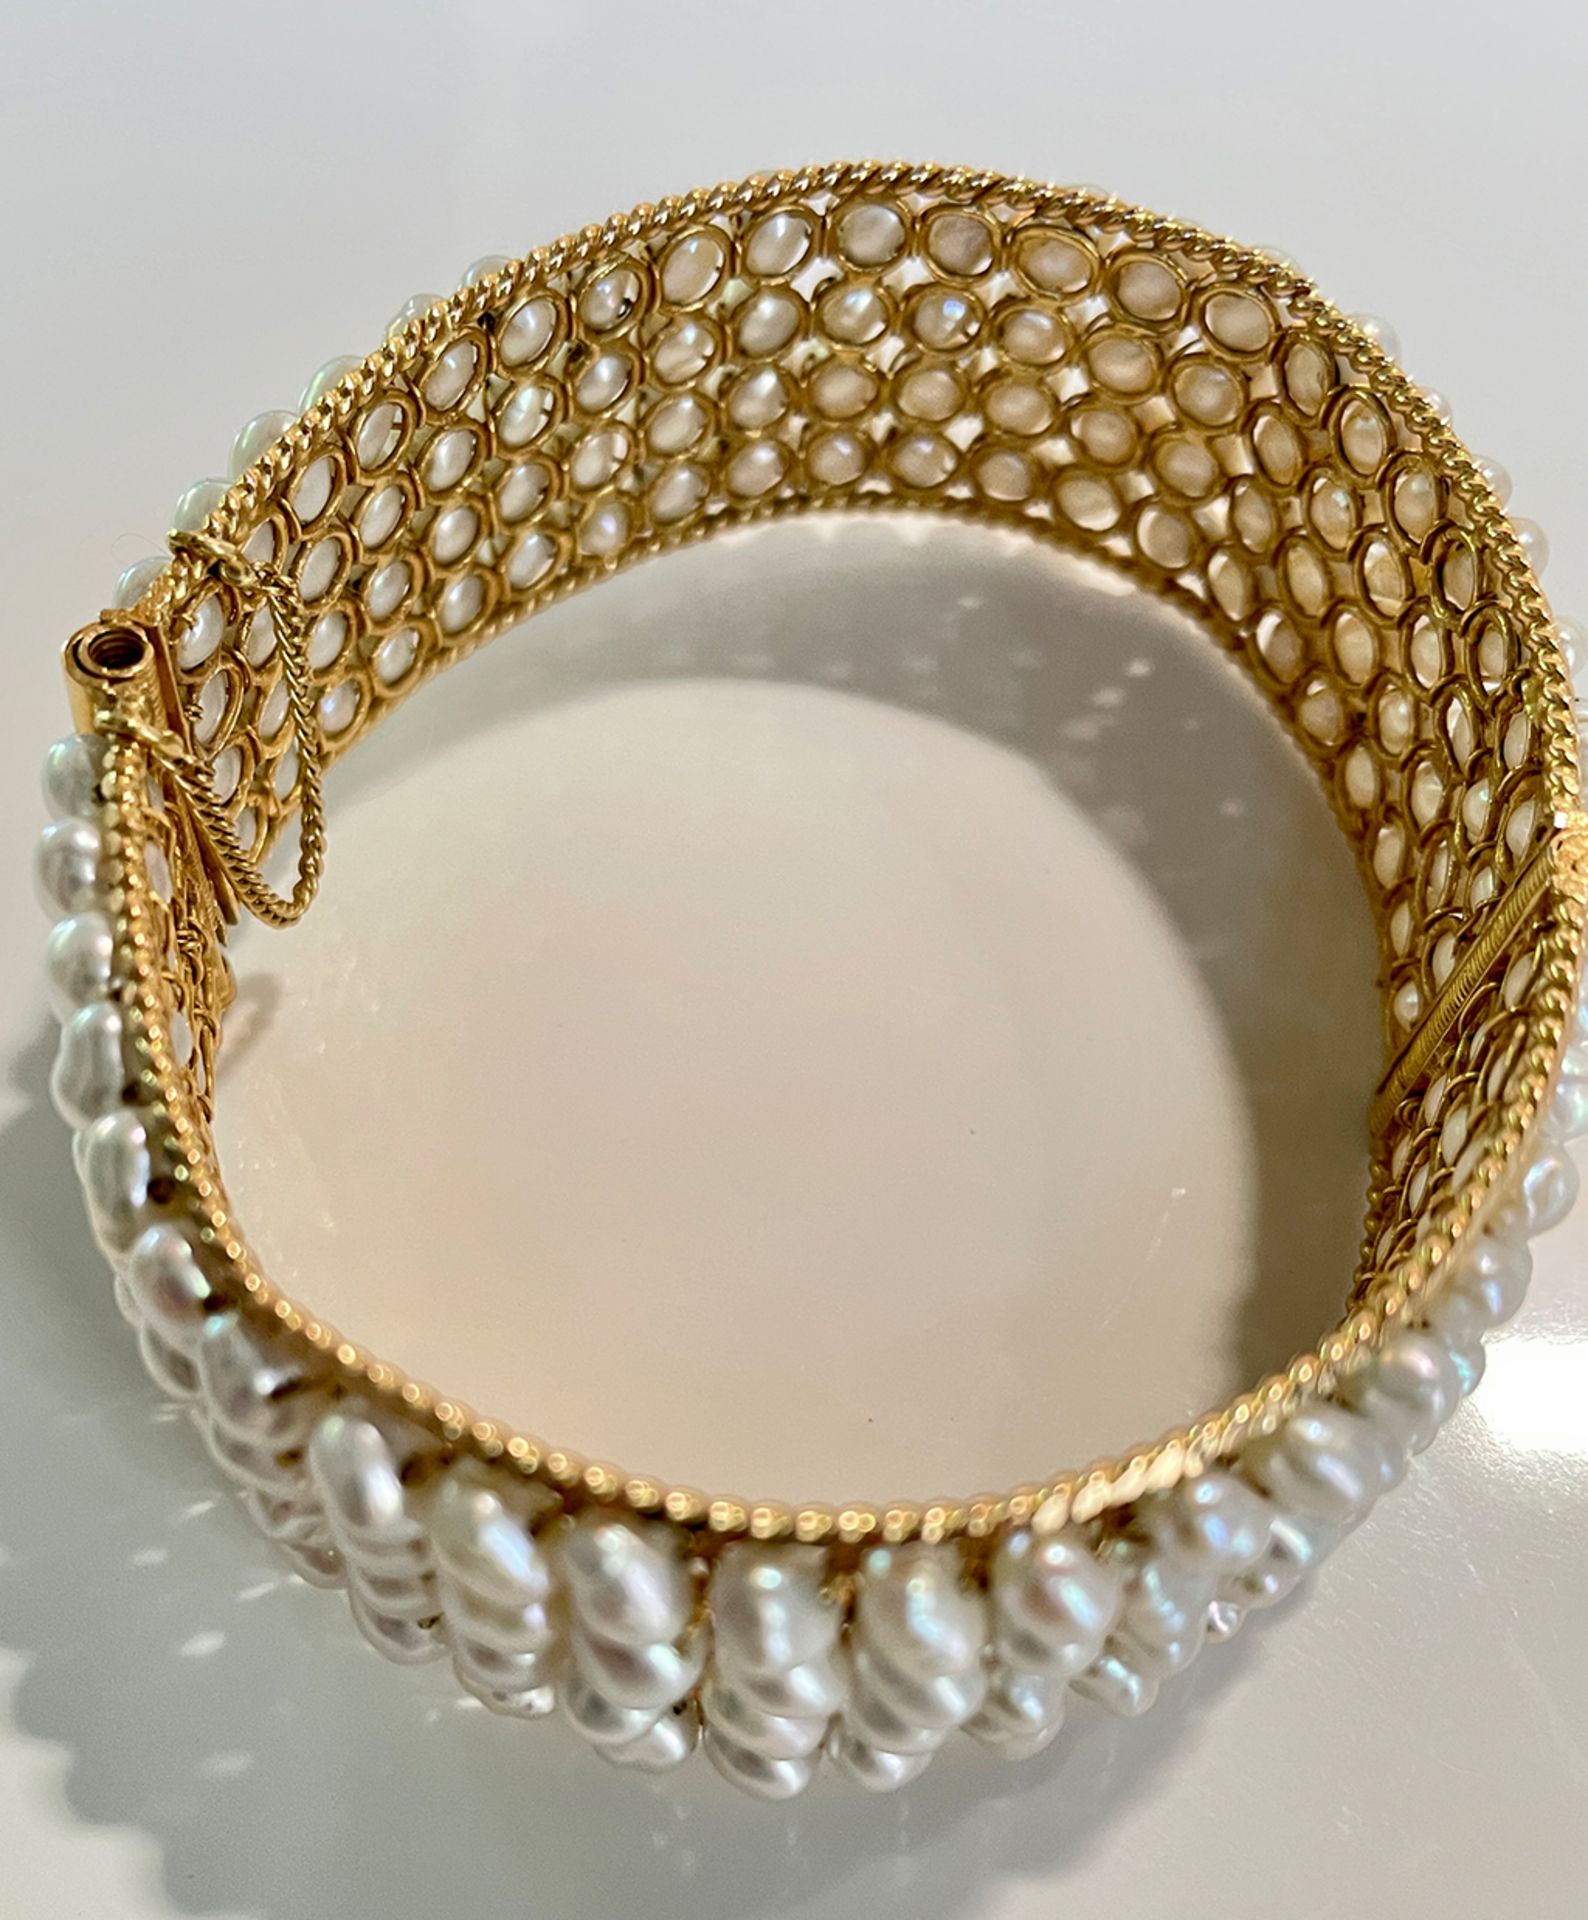 Antique 22K Gold bangle with Oriental pearls - Image 3 of 6